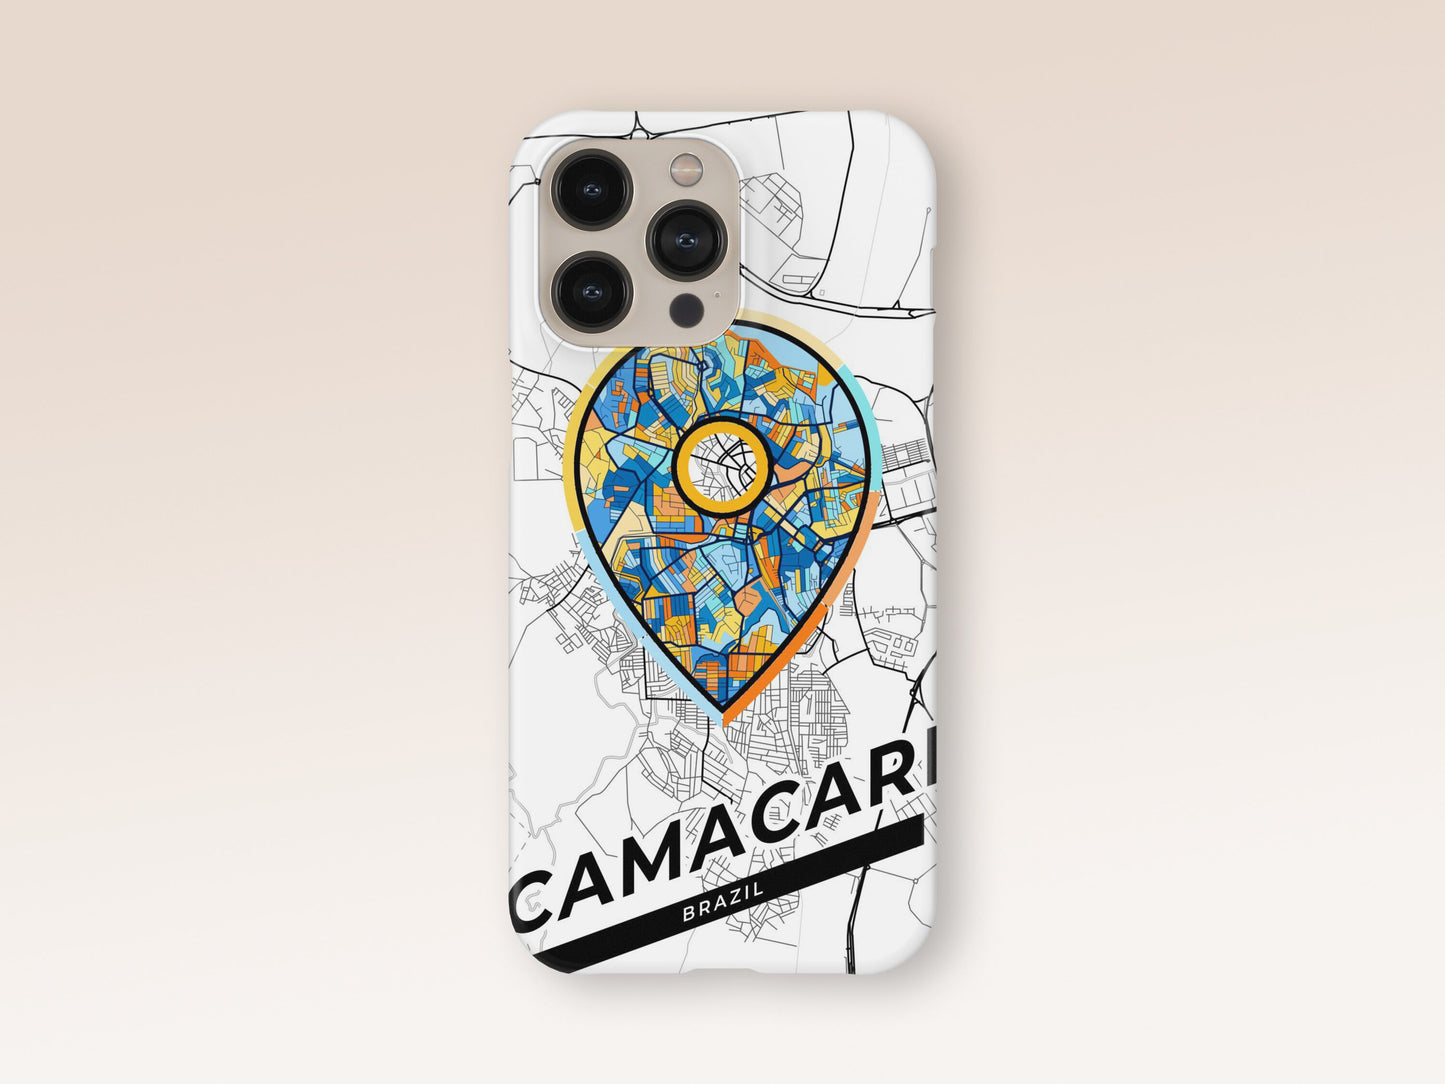 Camacari Brazil slim phone case with colorful icon. Birthday, wedding or housewarming gift. Couple match cases. 1